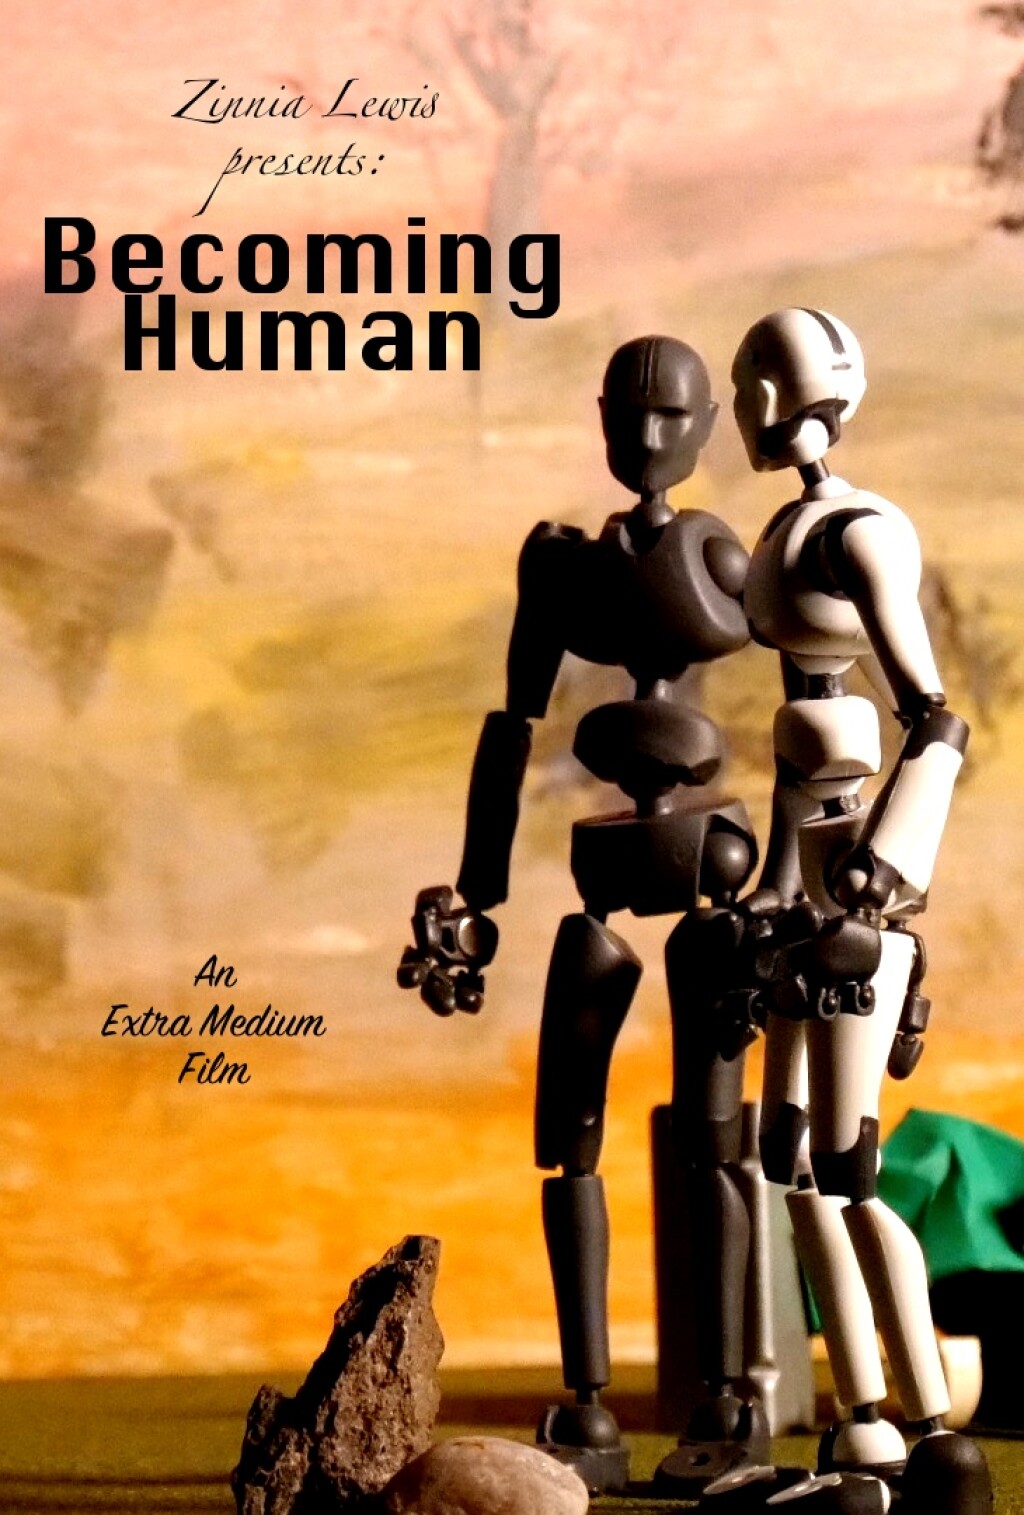 Filmposter for Zinnia Lewis Presents: Becoming Human